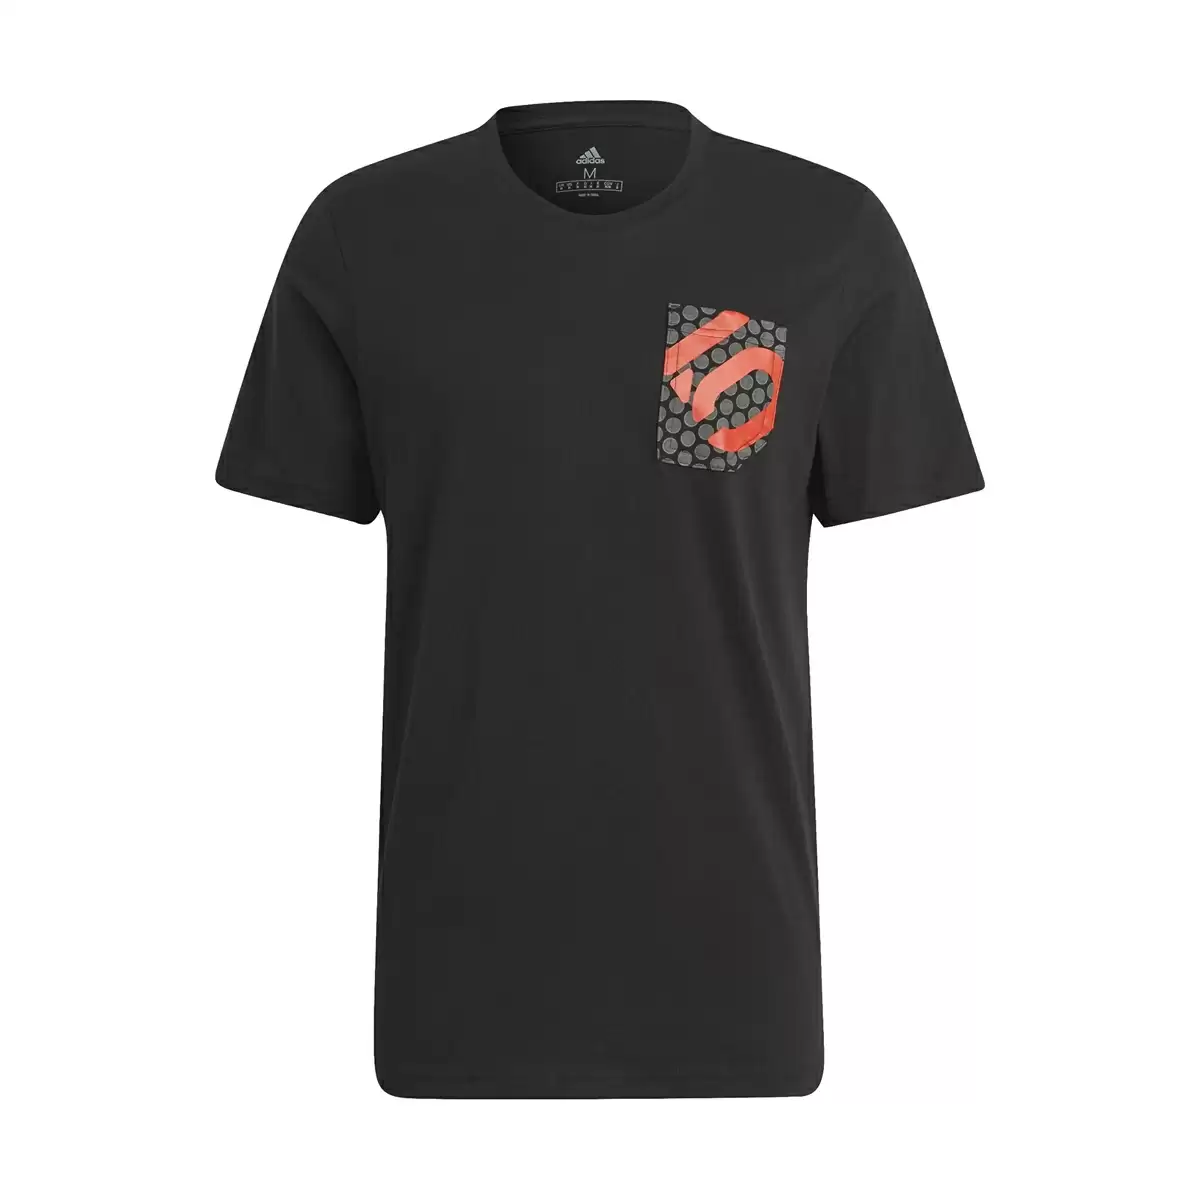 5.10 BOTB Brand of The Brave Tee Black 2021 Size S - image